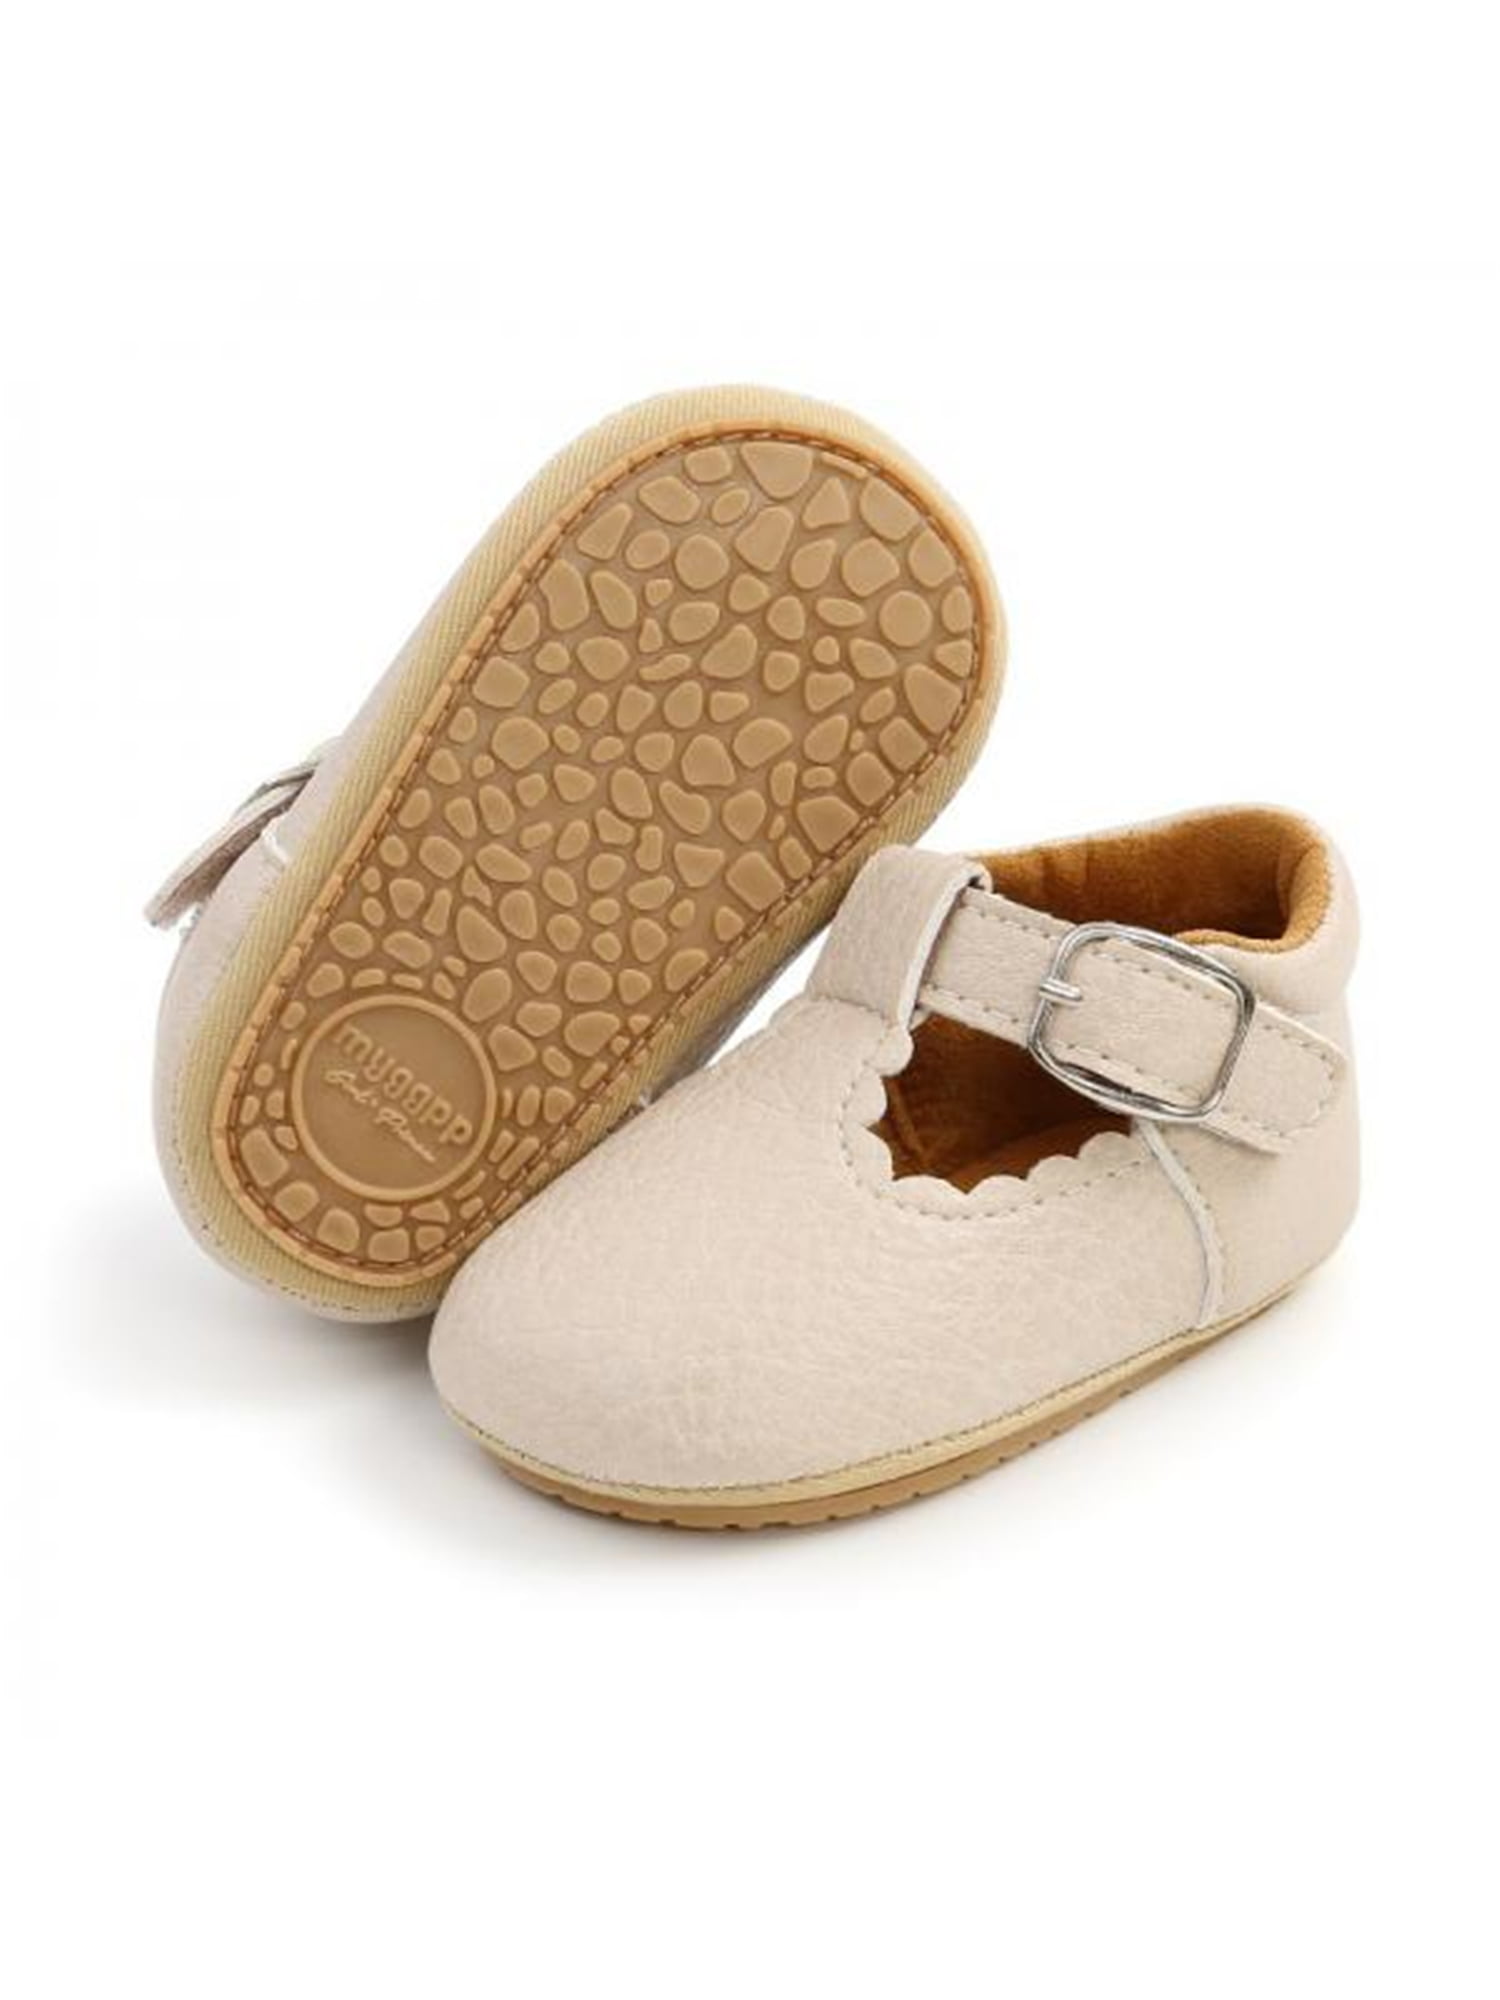 L-RUN Baby Boys Girls Wool Like House Slippers Kids Light Weight Anti-Skid Shoes for Outdoor Indoor Comfy Loafers